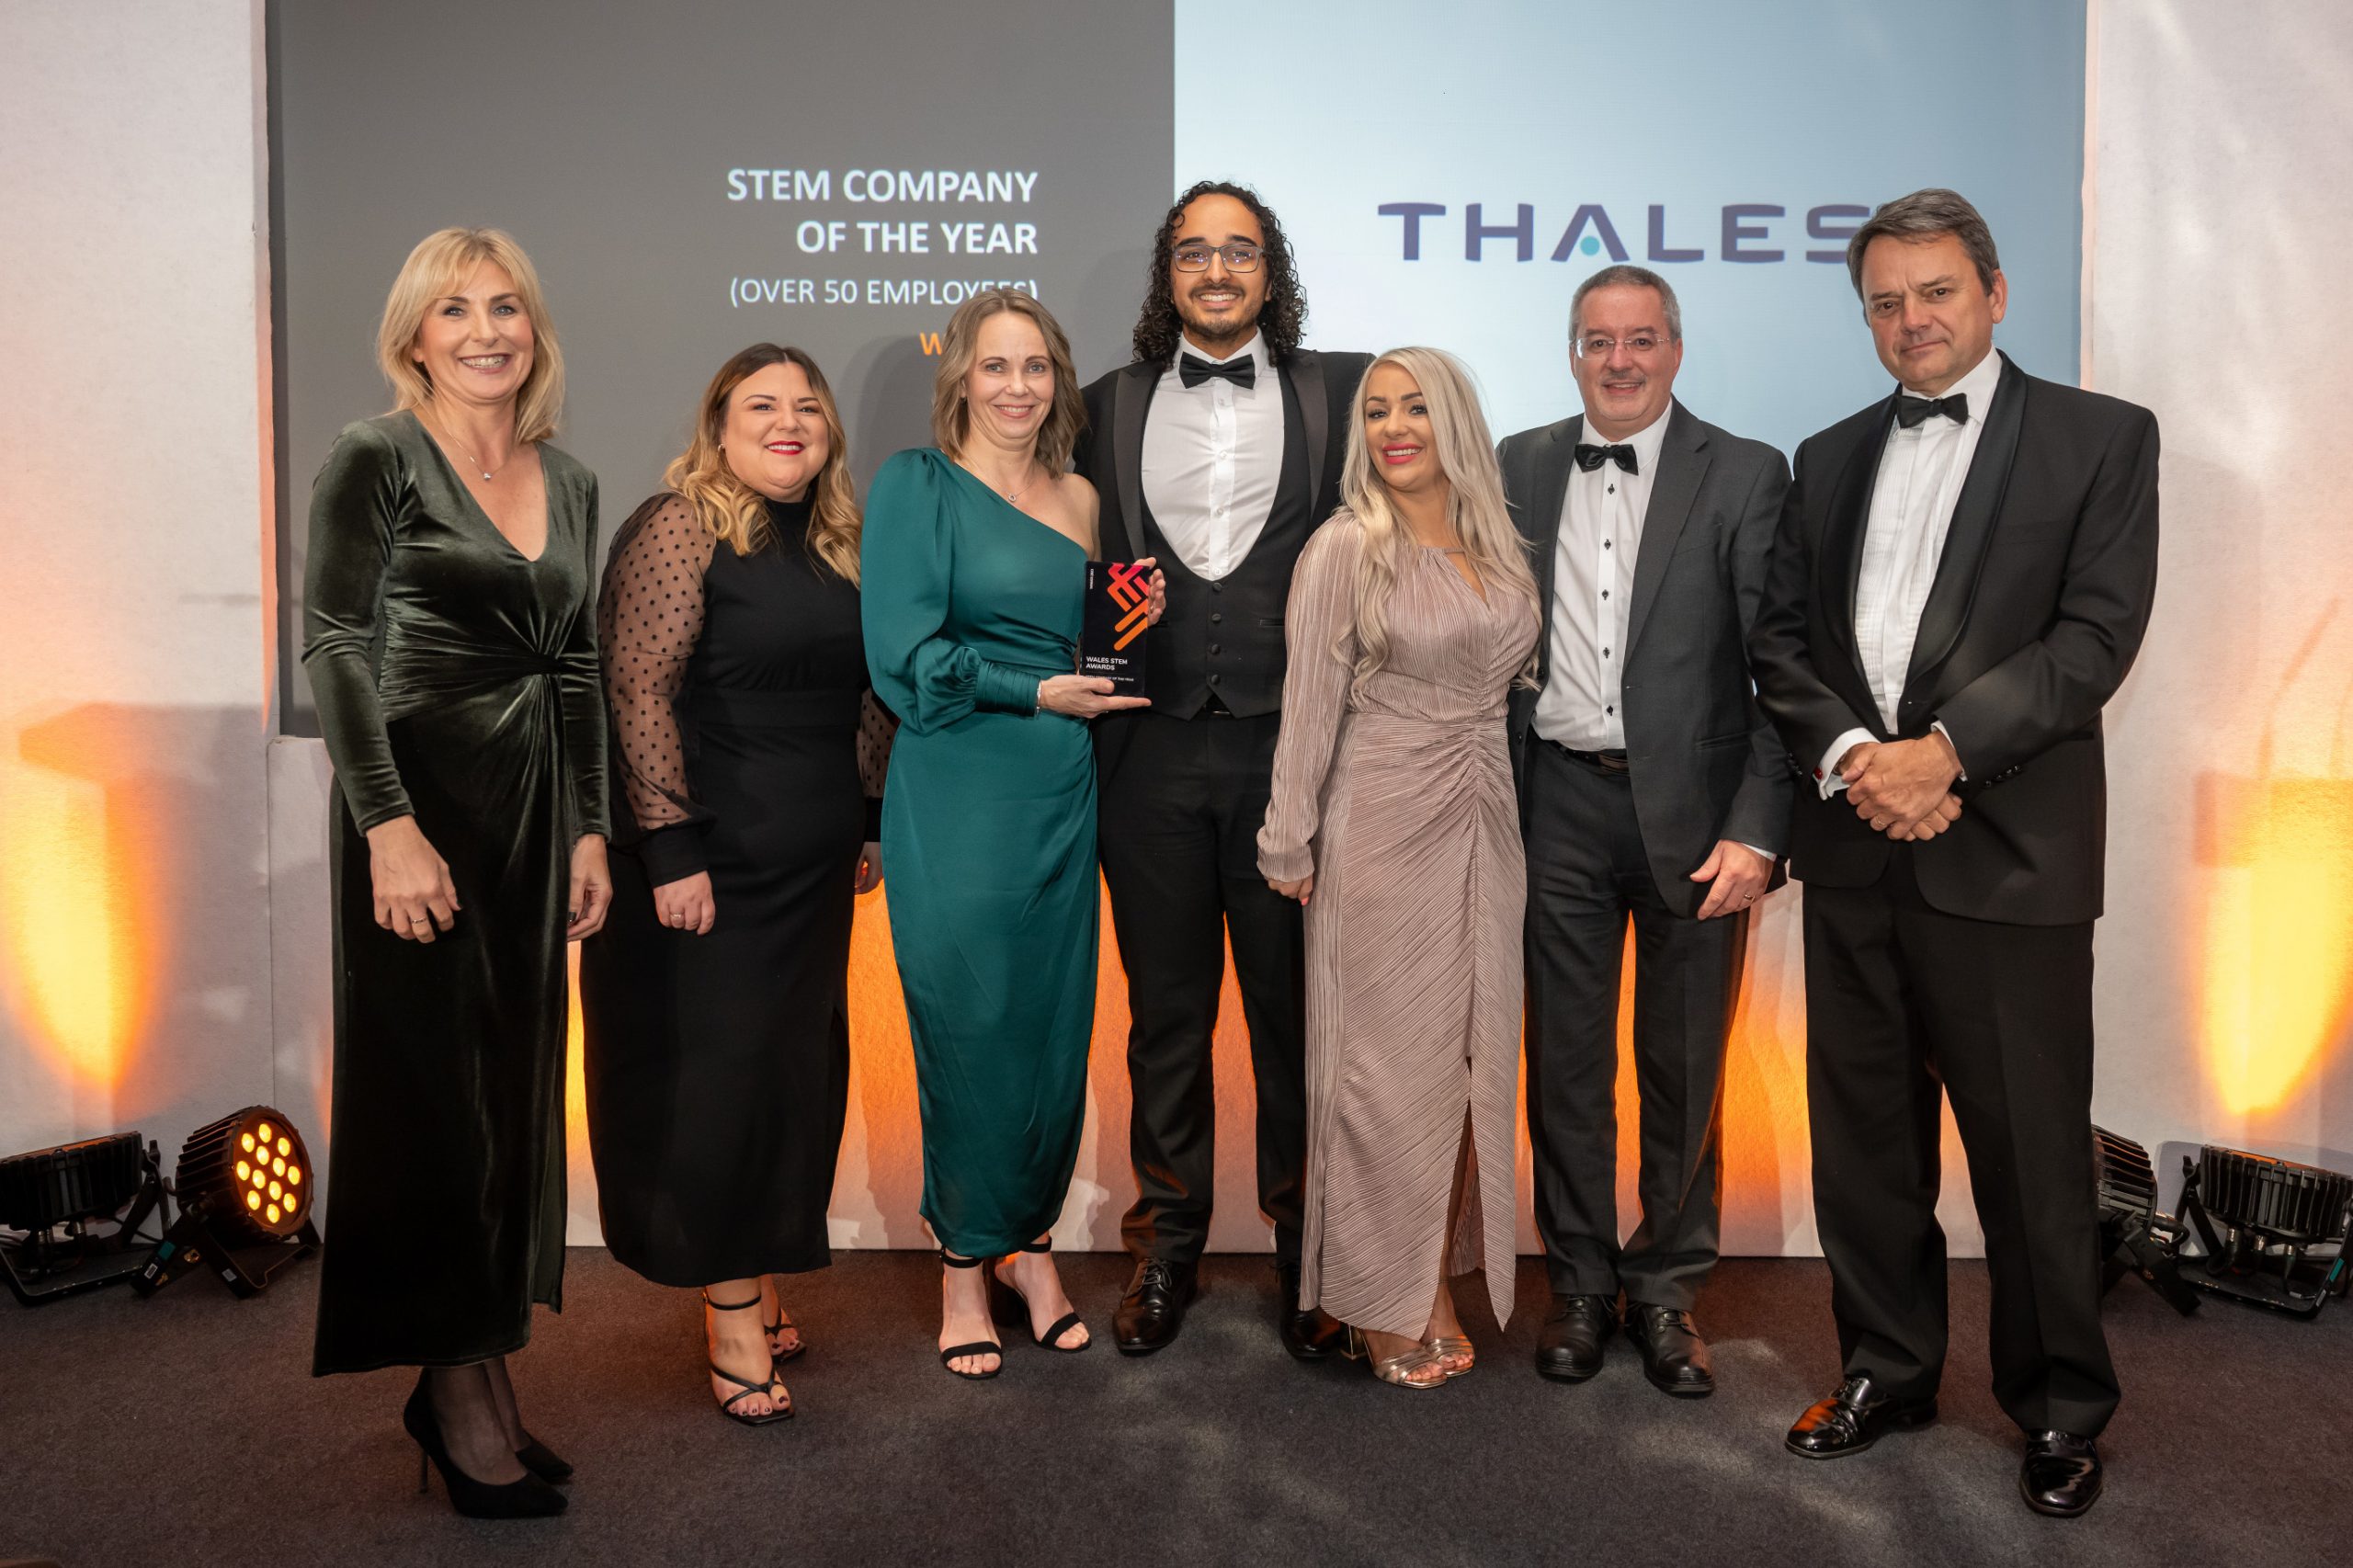 Thales wins Company of the Year Award